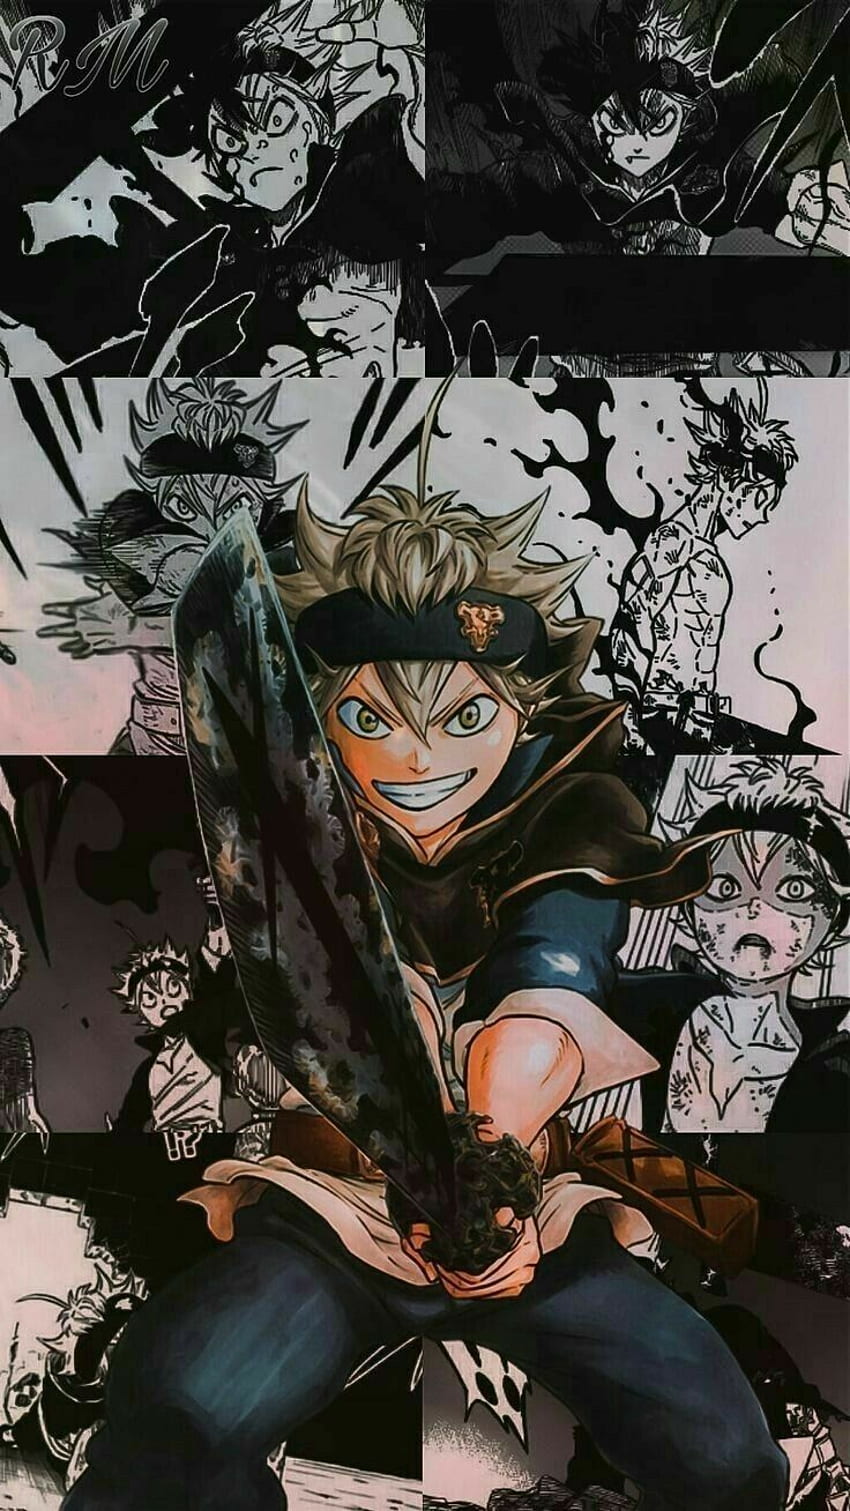 Most Best Anime IPhone Funny Black Clover, Black Clover Anime, Black Clover wallpap. en 2020. Black clover anime, Anime , Black clover manga fondo de pantalla del teléfono